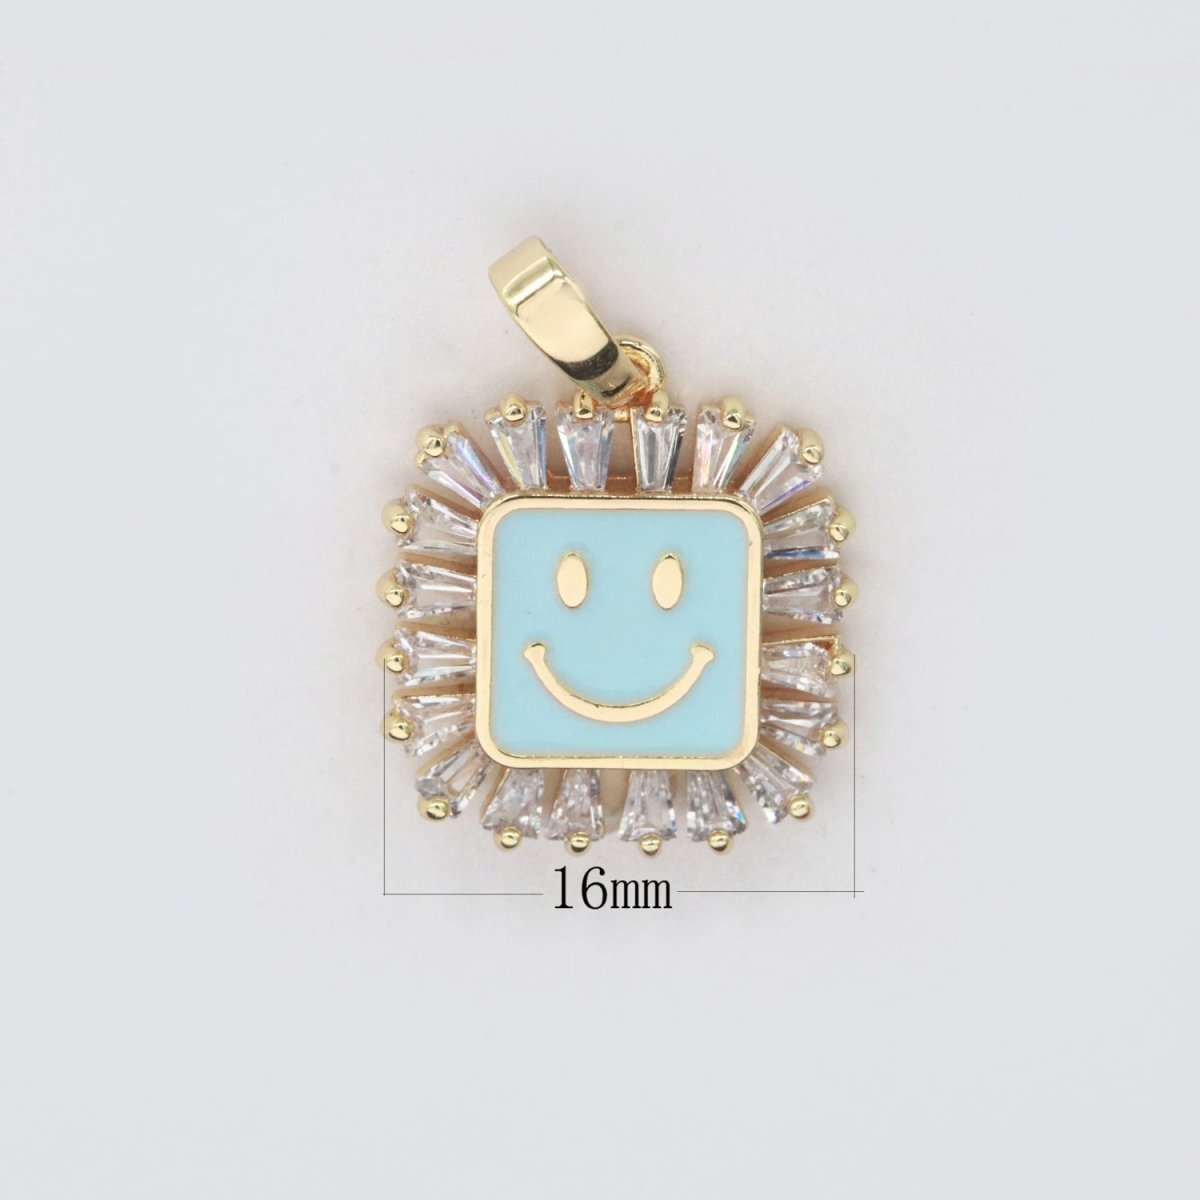 Square Smiley Face Charm Cubic Happy Face Pendant for Necklace Earring Component I-219 I-223 I-225 I-231 I-232 I-239 - DLUXCA